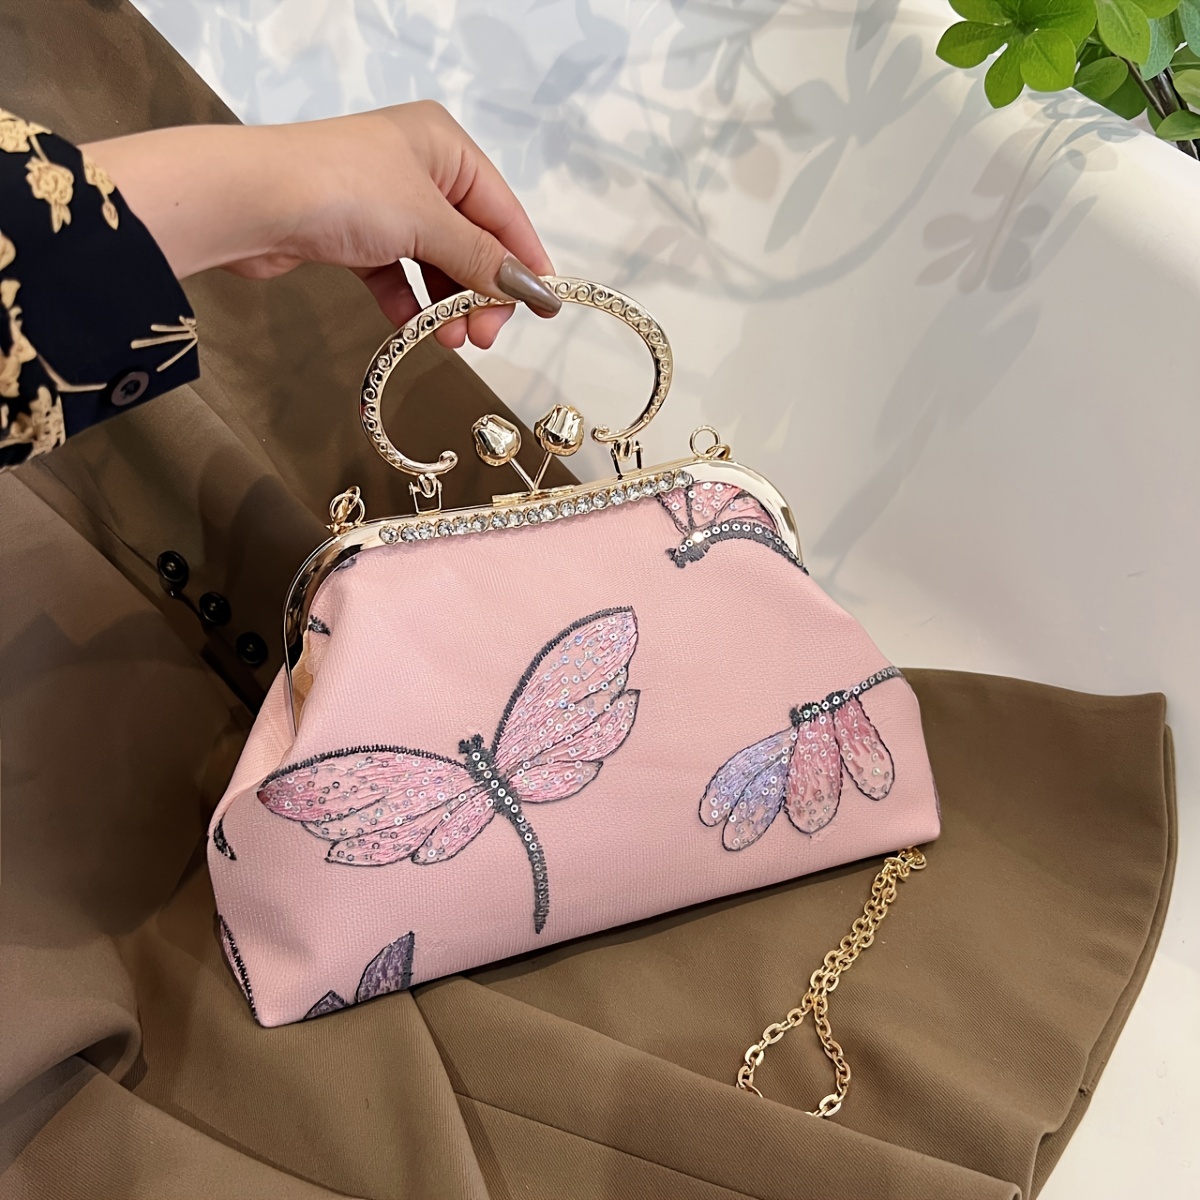 Gets Acrylic Purses and Handbags for Women Shell Shape Shoulder Crossbody  Bag with Chain Elegant Clutch Purse for Wedding Banquet Evening Party:  Handbags